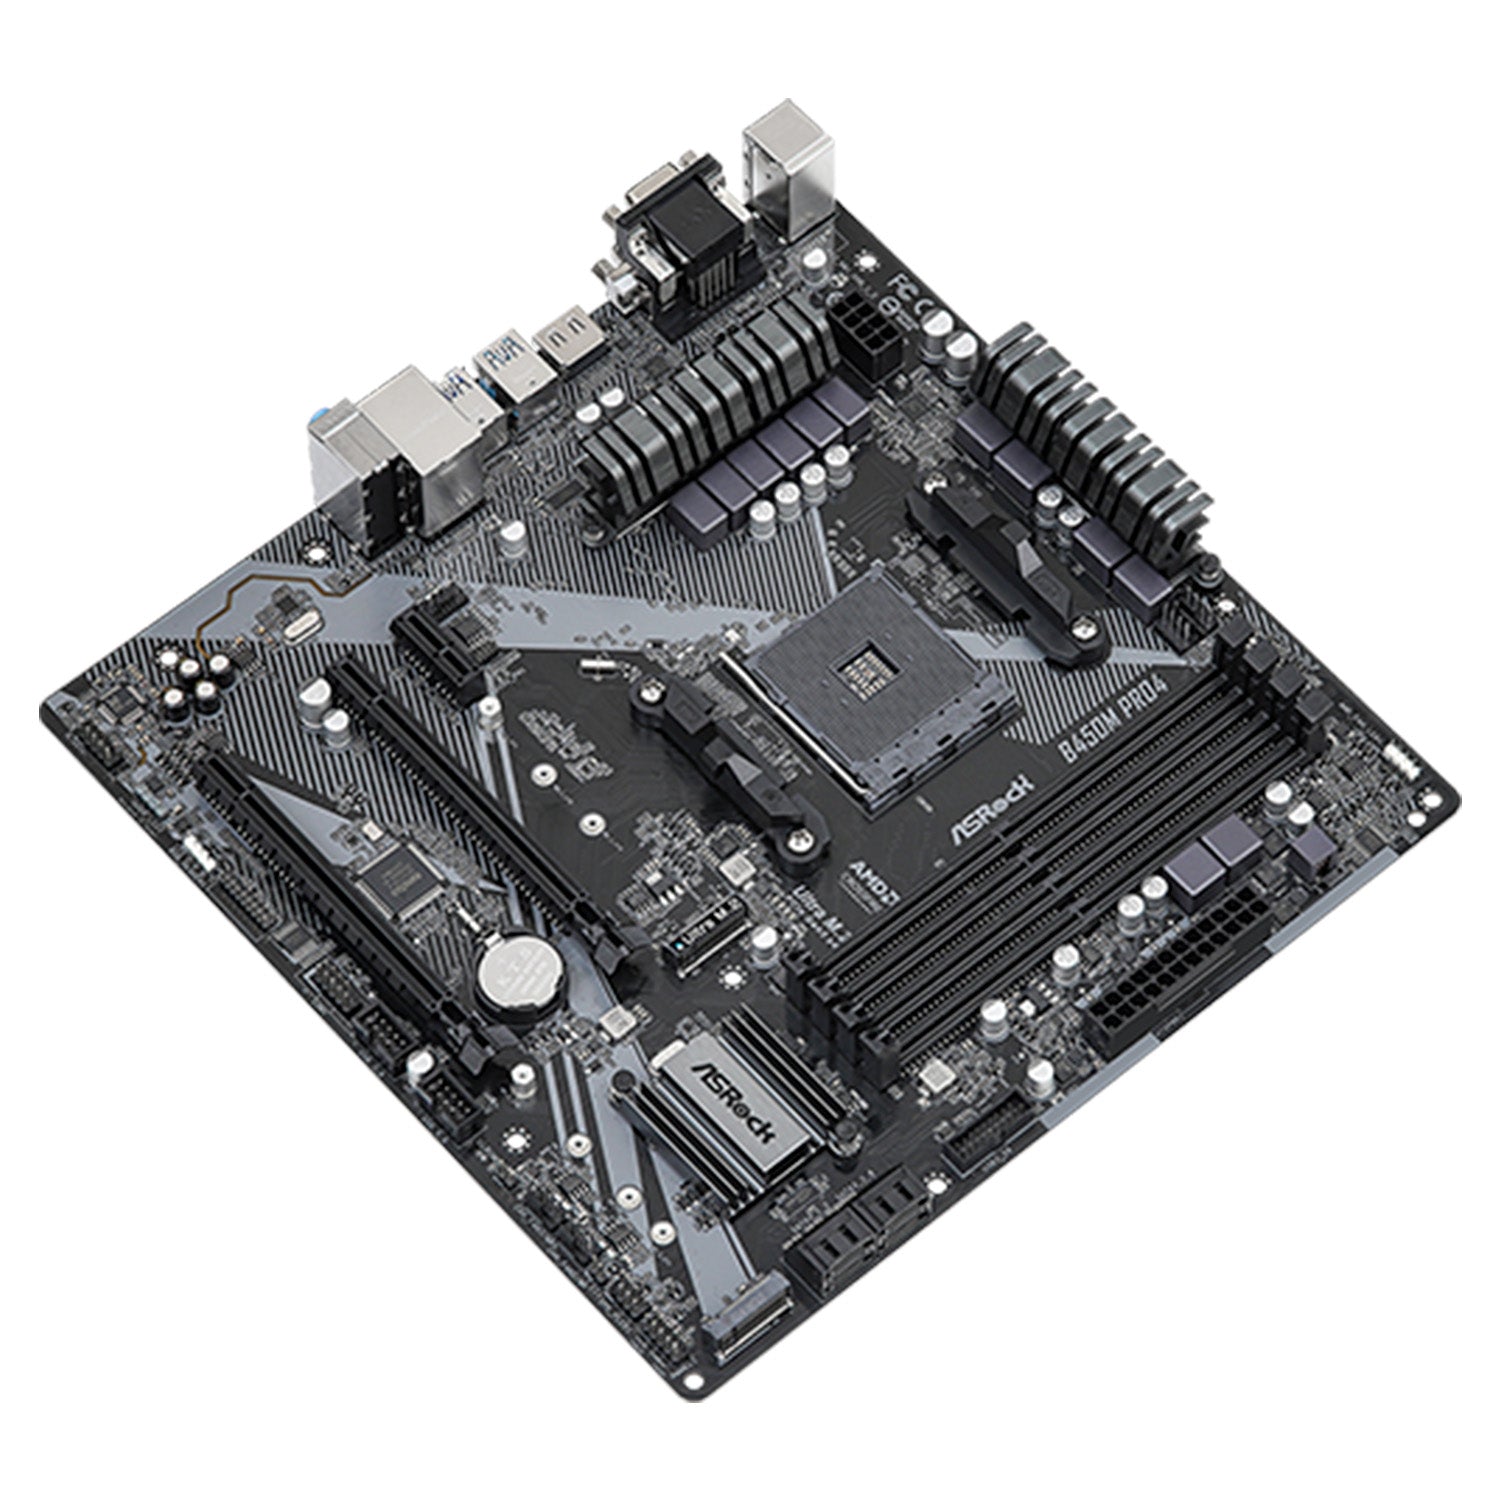 AsRock B450 PRO4 R2.0 Motherboard, AMD AM4 Socket, AMD B450 Chipset, SATA 6Gbps Micro ATX  with DDR4 Up to 128GB, Dual M.2 For SSD, USB 3.2 Gen 2 ports, Support Windows 11 and VR Ready